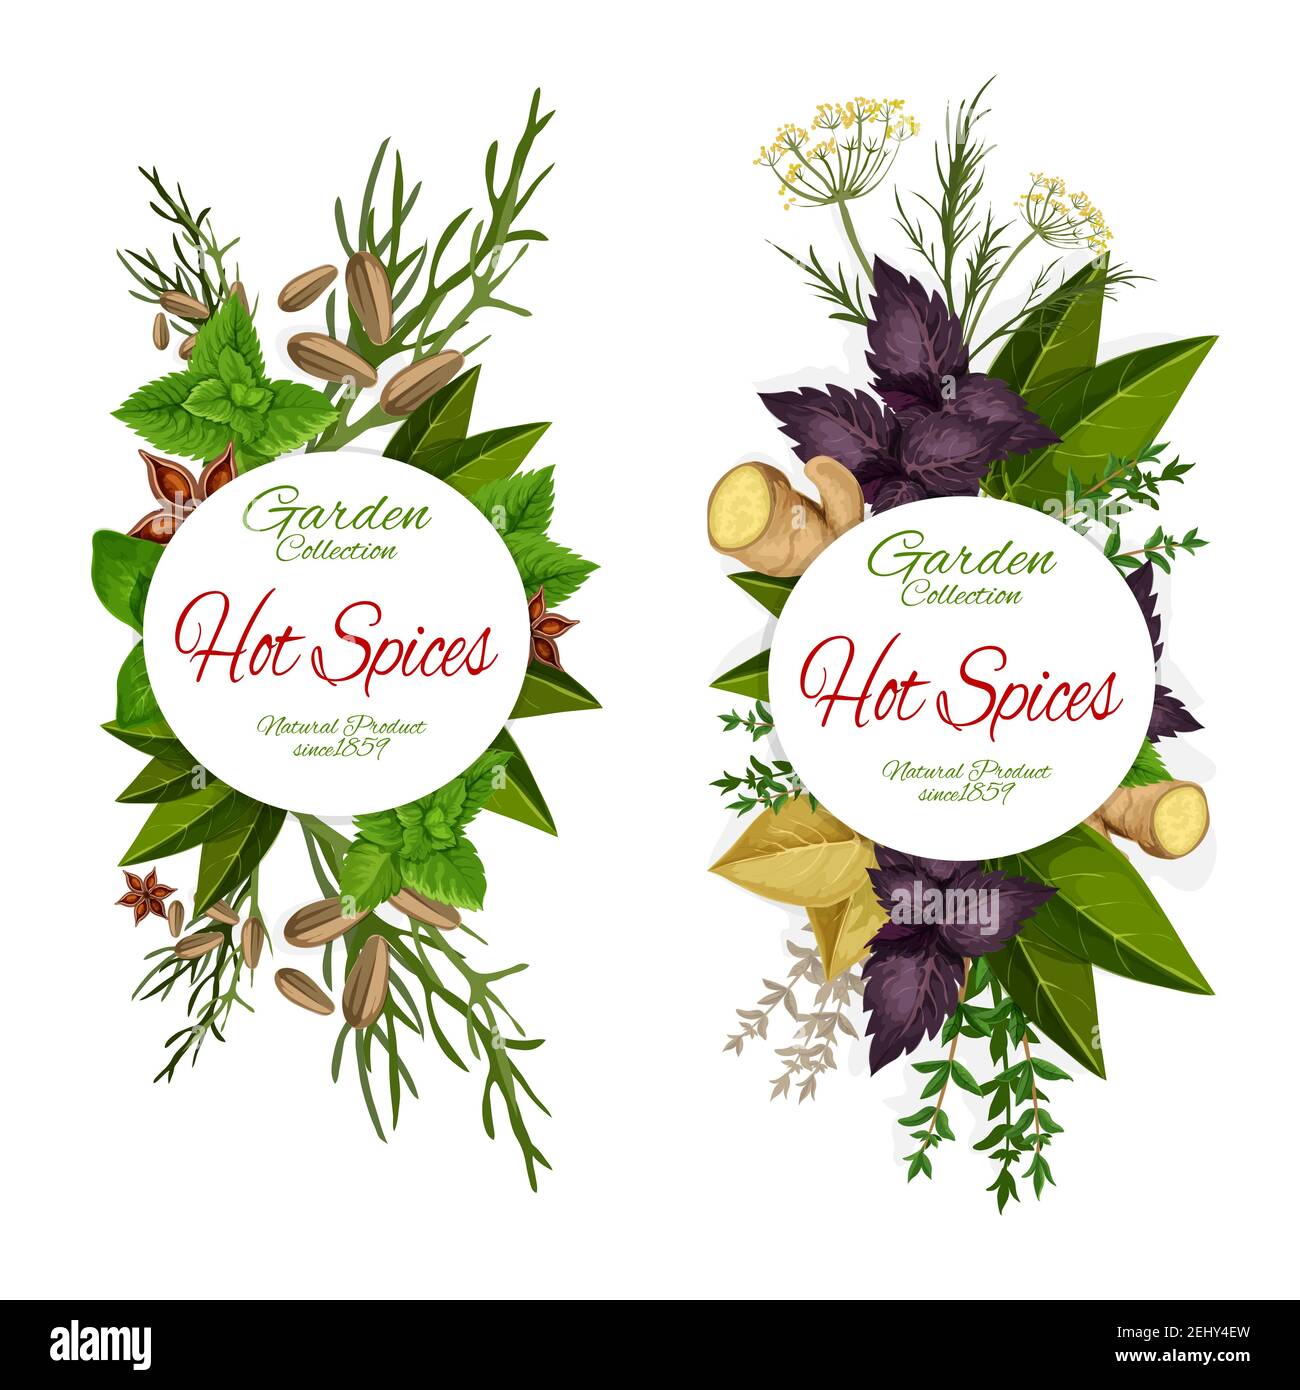 Herbs and spices, seasonings icons, grocery store. Cardamom and ginger, parsley and dill, basil and melissa, sage and anise. Vector natural condiments Stock Vector